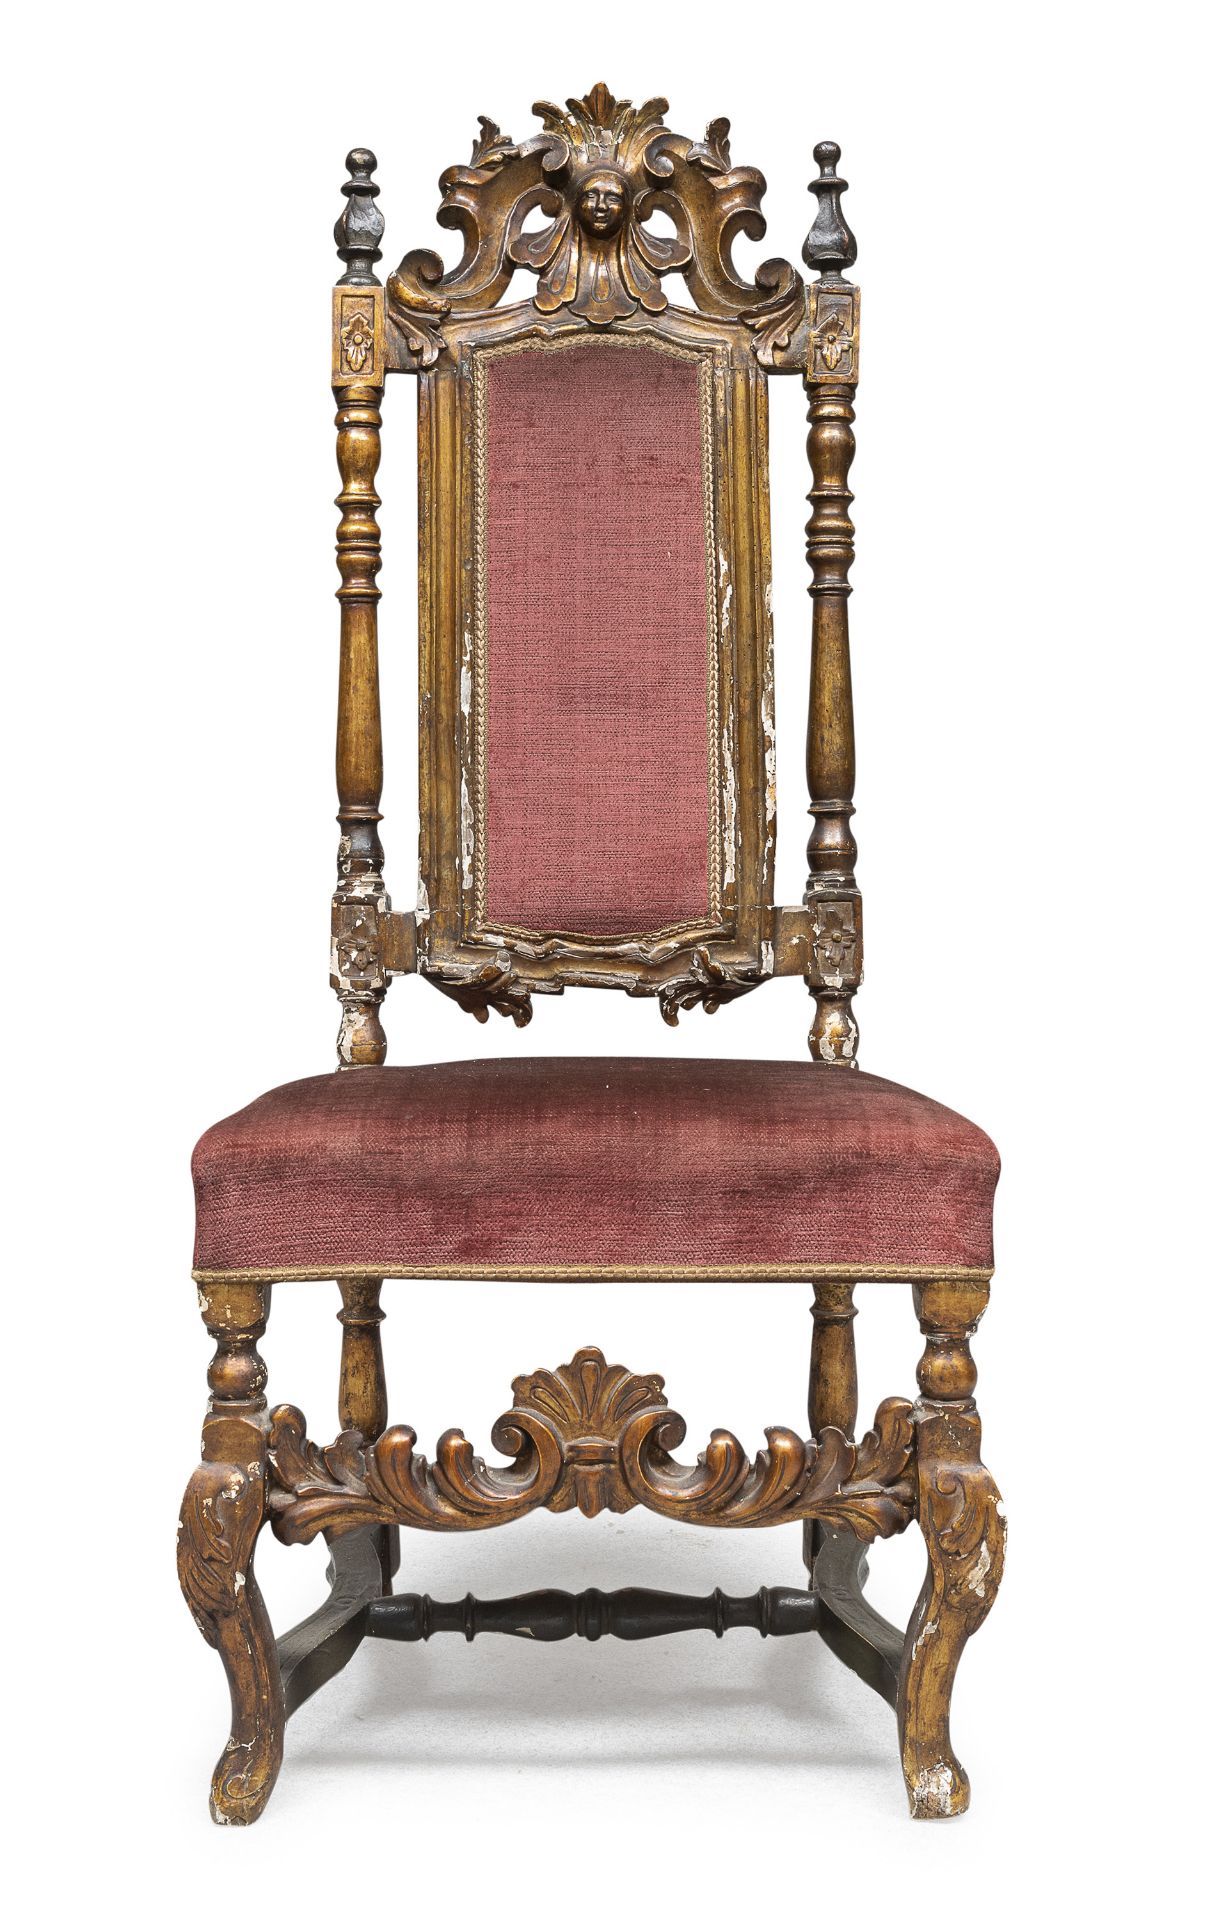 SANT'ANNA CHAIR IN GILTWOOD NAPLES 18th CENTURY